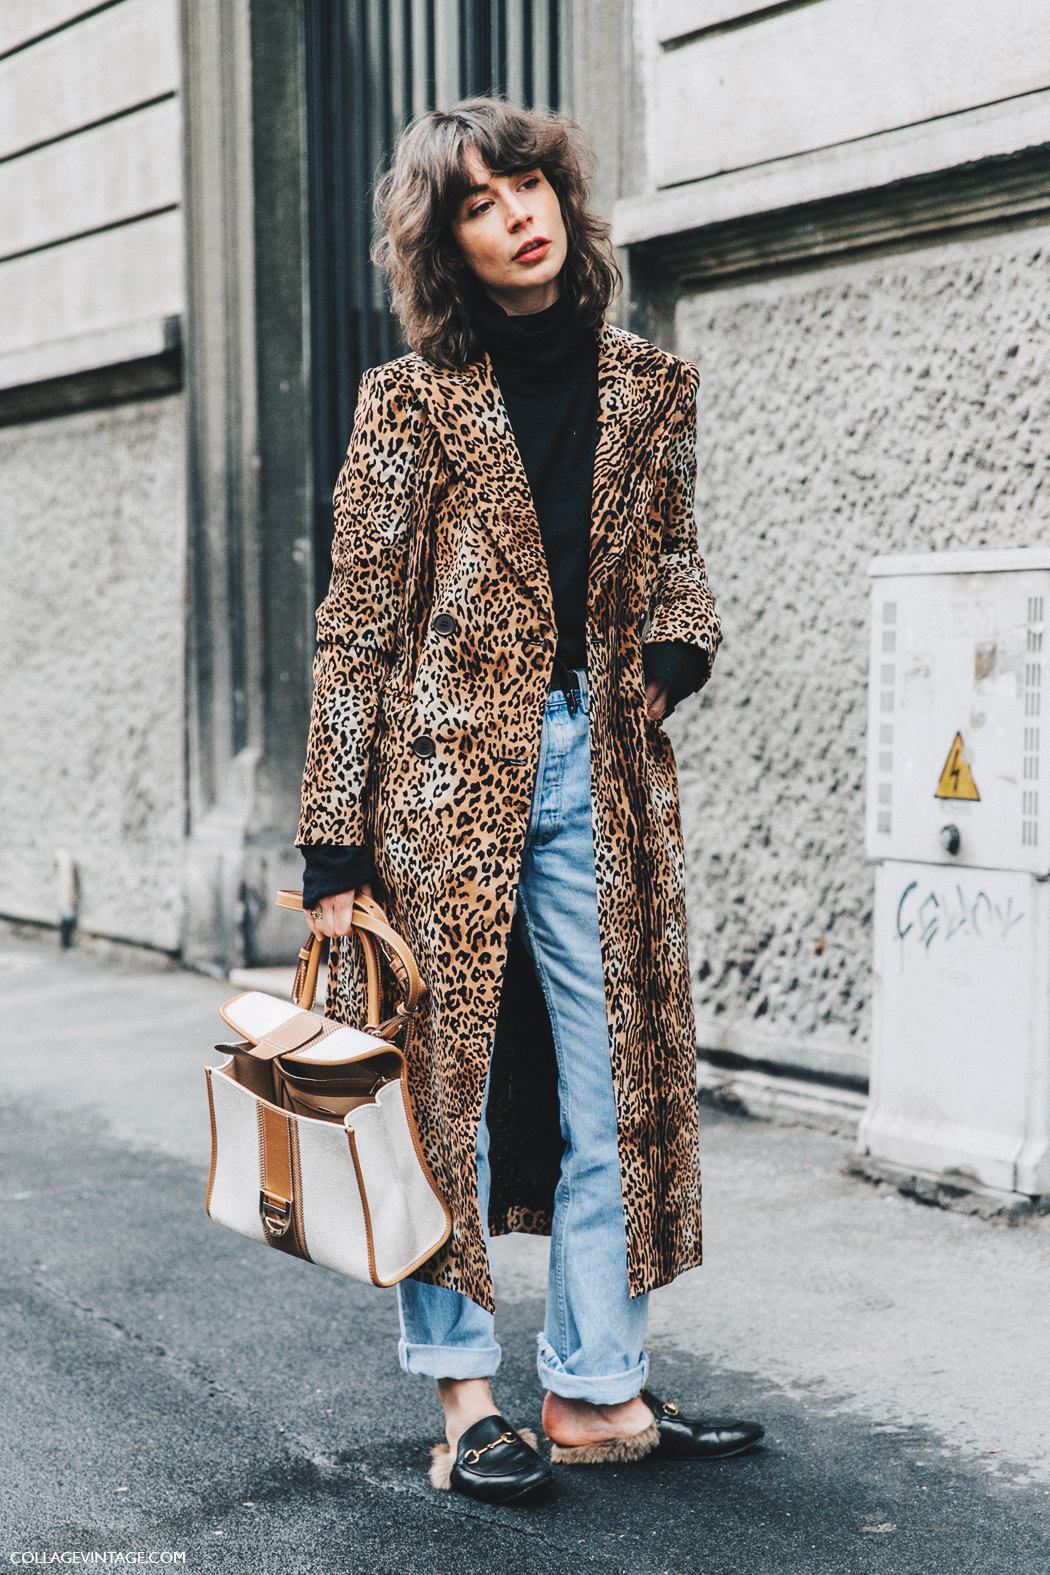 Milan_Fashion_Week_Fall_16-MFW-Street_Style-Collage_Vintage-Irina_Lakicevic-Leopard_Coat-Gucci_Slippers-